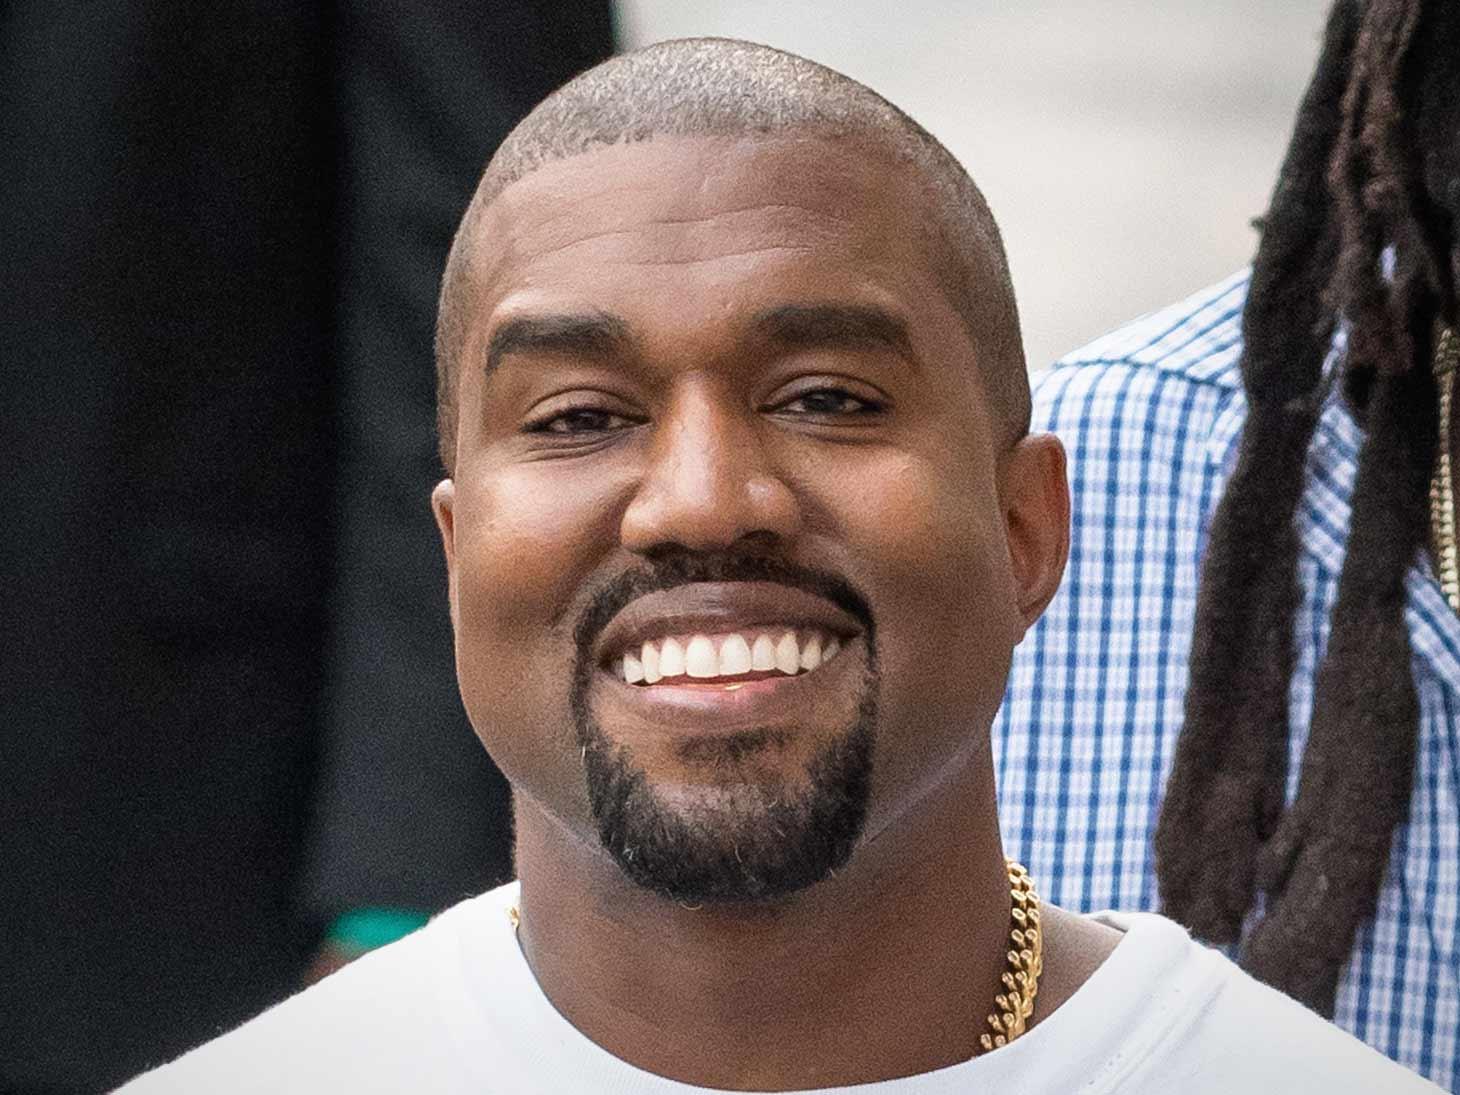 Kanye West Reaches Deal to End Tidal Legal Battle over ‘Life of Pablo’ Deception